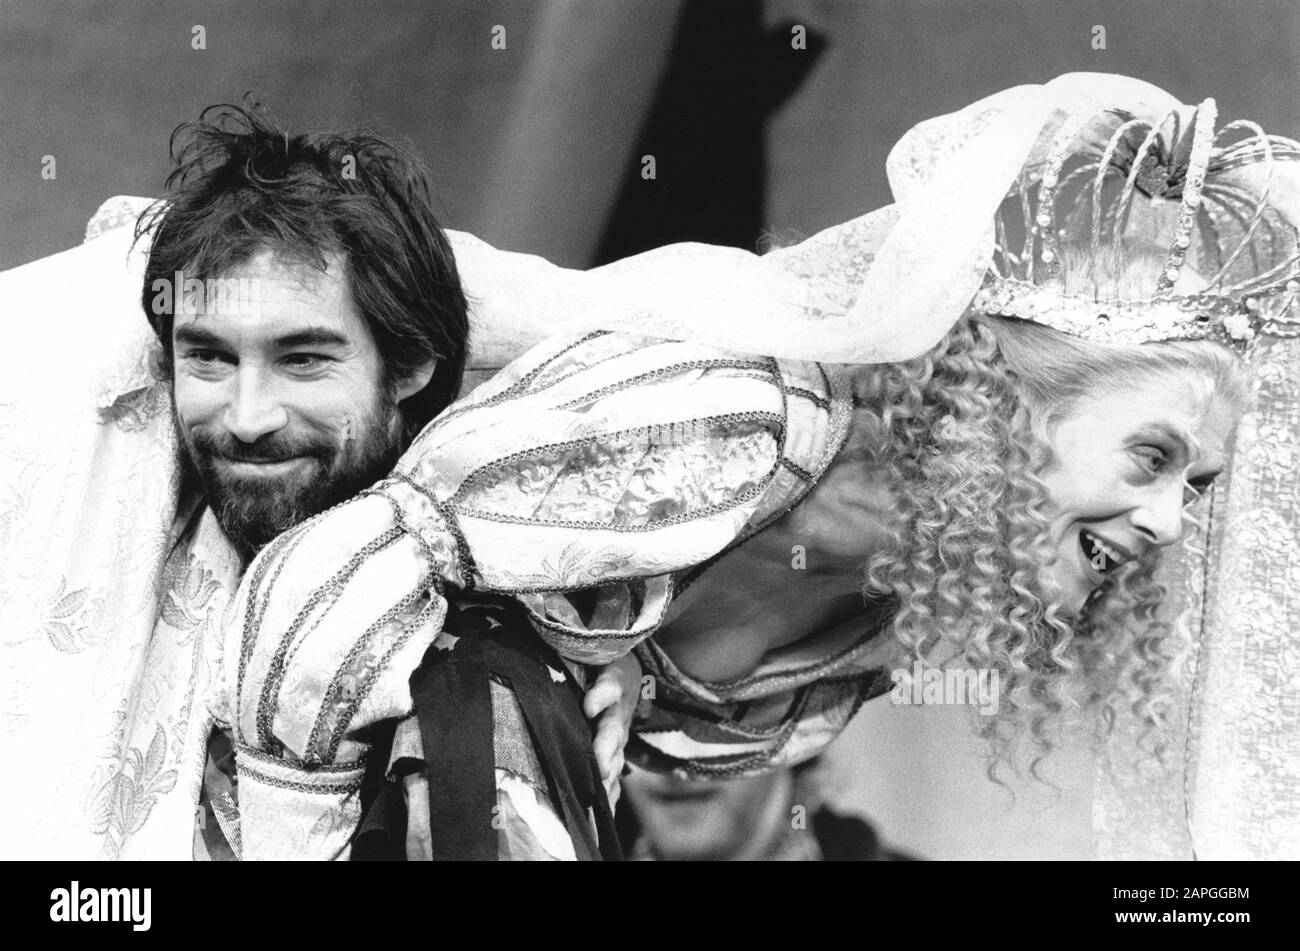 Timothy Dalton (Petruchio) and Vanessa Redgrave (Katherina) in THE TAMING OF THE SHREW by Shakespeare  directed by Toby Robertson at the Theatre Royal Haymarket, London in 1986. Vanessa Redgrave, actress and political activist, born in London in 1937. Awarded CBE in 1967. In a long-term relationship with Timothy Dalton from 1971 to 1986. Stock Photo